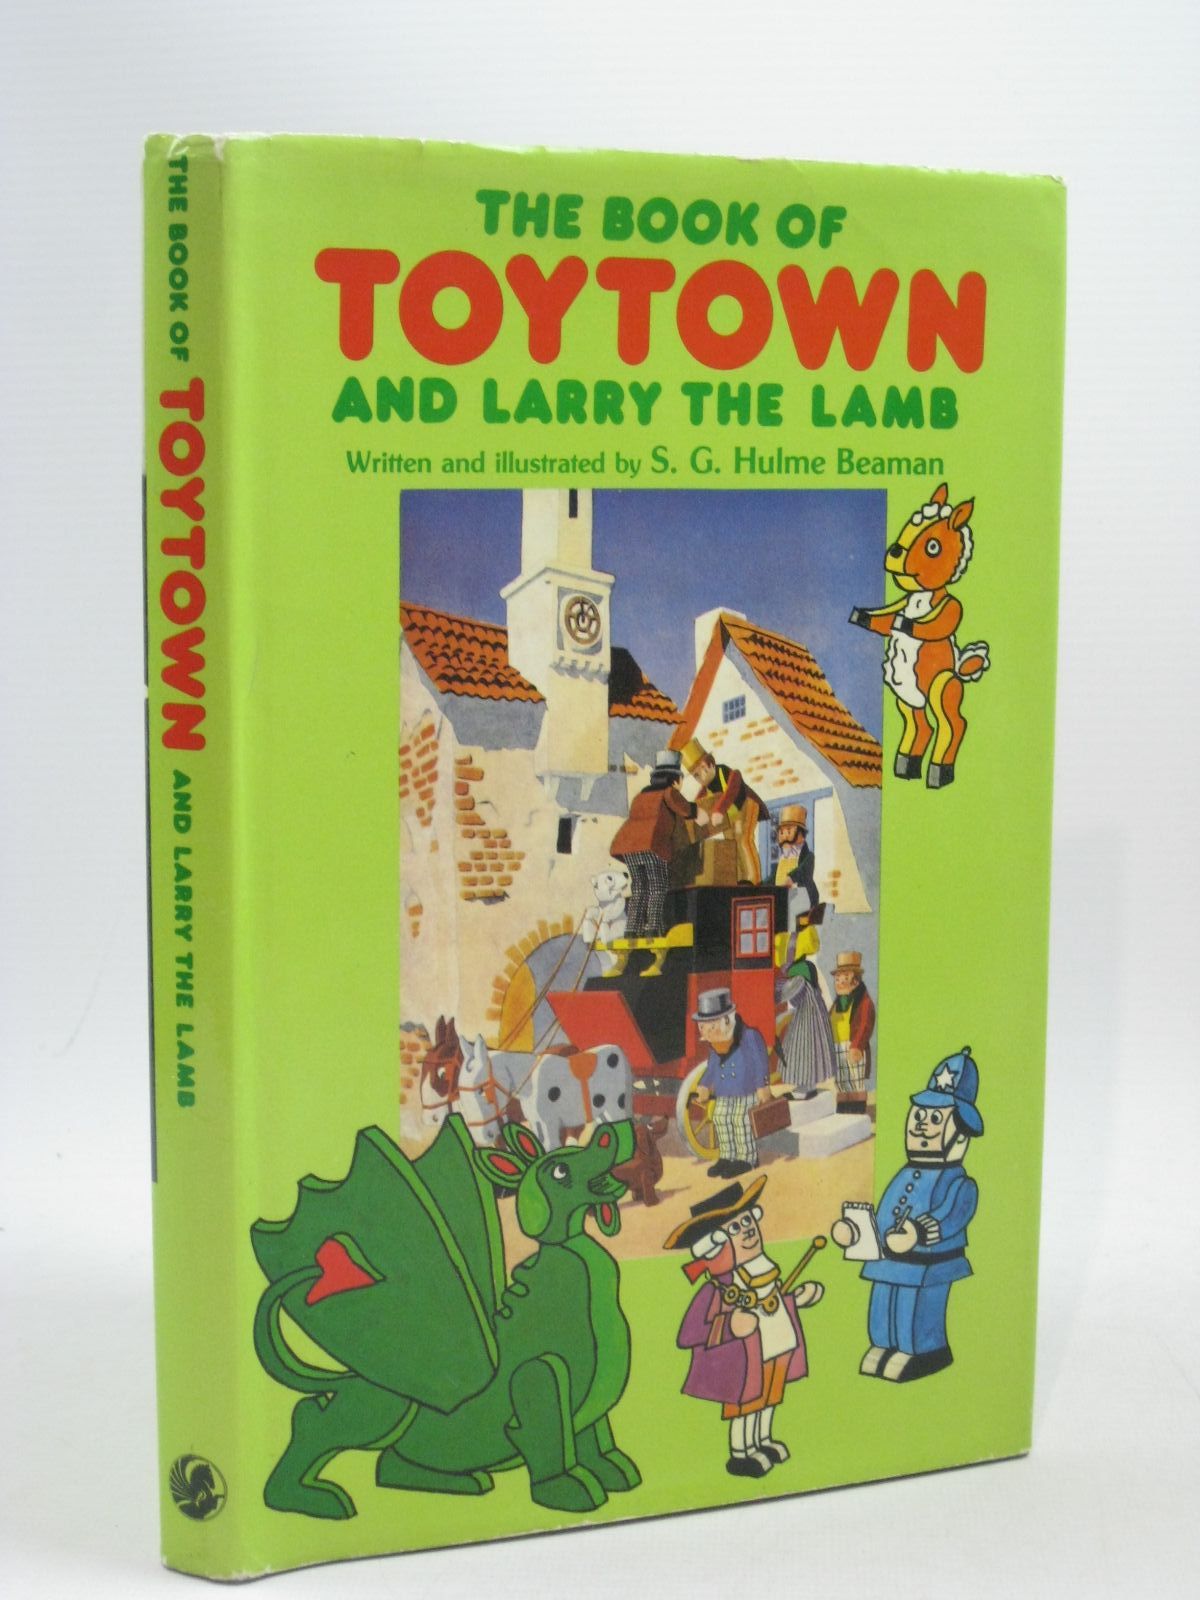 Cover of THE BOOK OF TOYTOWN AND LARRY THE LAMB by S.G. Hulme Beaman